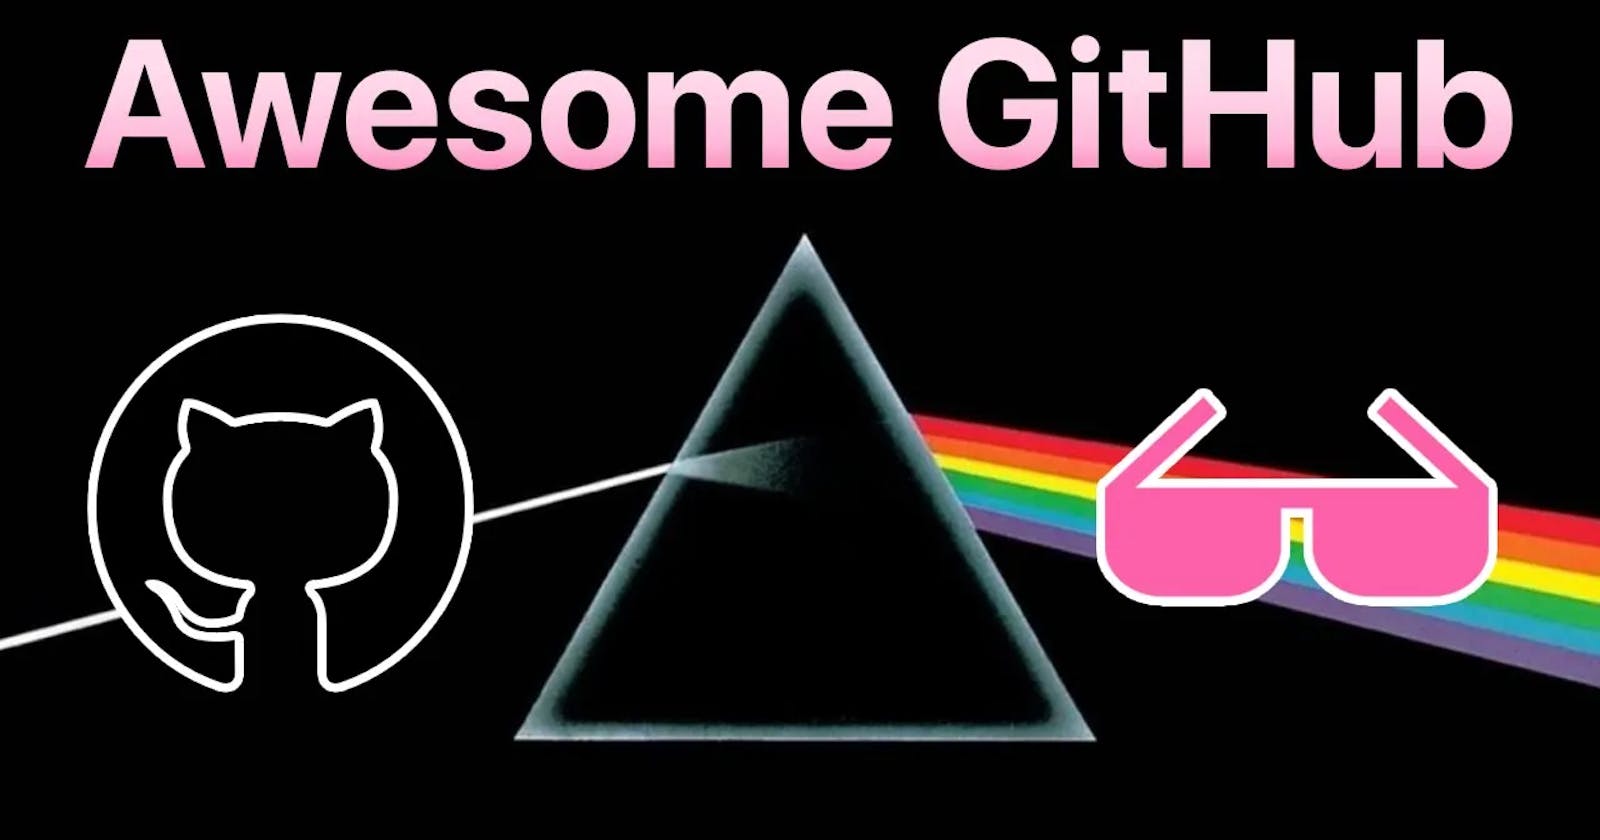 The Awesome Side of GitHub